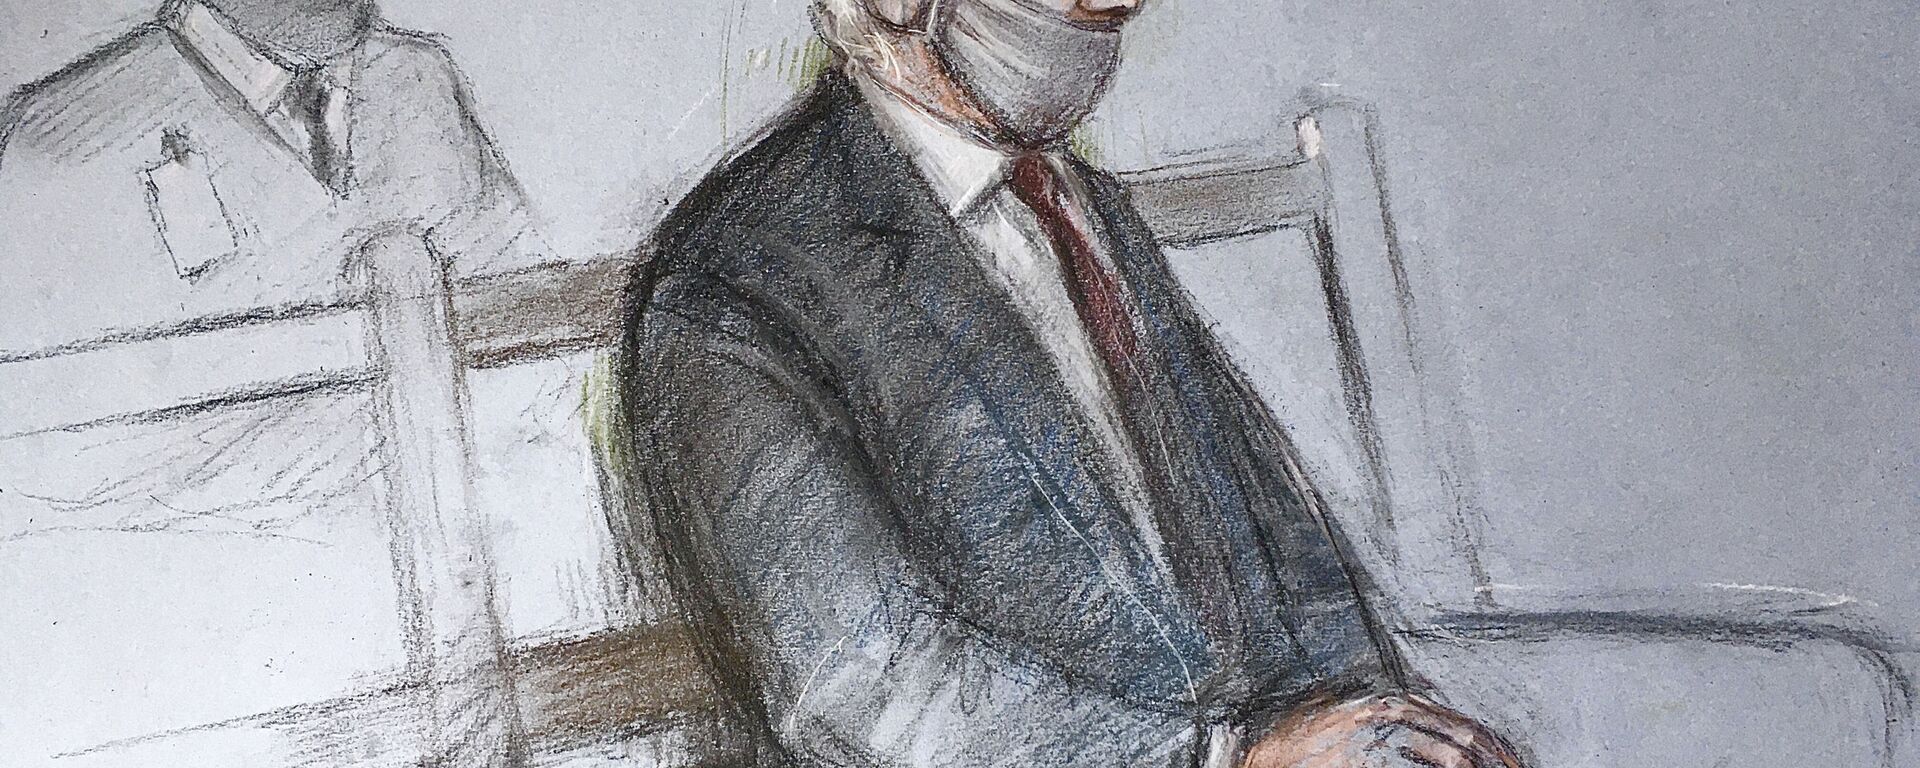 This is a court artist sketch by Elizabeth Cook of Julian Assange appearing at the Old Bailey in London for the ruling in his extradition case, in London, Monday, Jan. 4, 2021. A British judge has rejected the United States’ request to extradite WikiLeaks founder Julian Assange to face espionage charges, saying it would be “oppressive” because of his mental health. District Judge Vanessa Baraitser said Assange was likely to kill himself if sent to the U.S. The U.S. government said it would appeal the decision.  (Elizabeth Cook/PA via AP) - Sputnik International, 1920, 11.08.2021